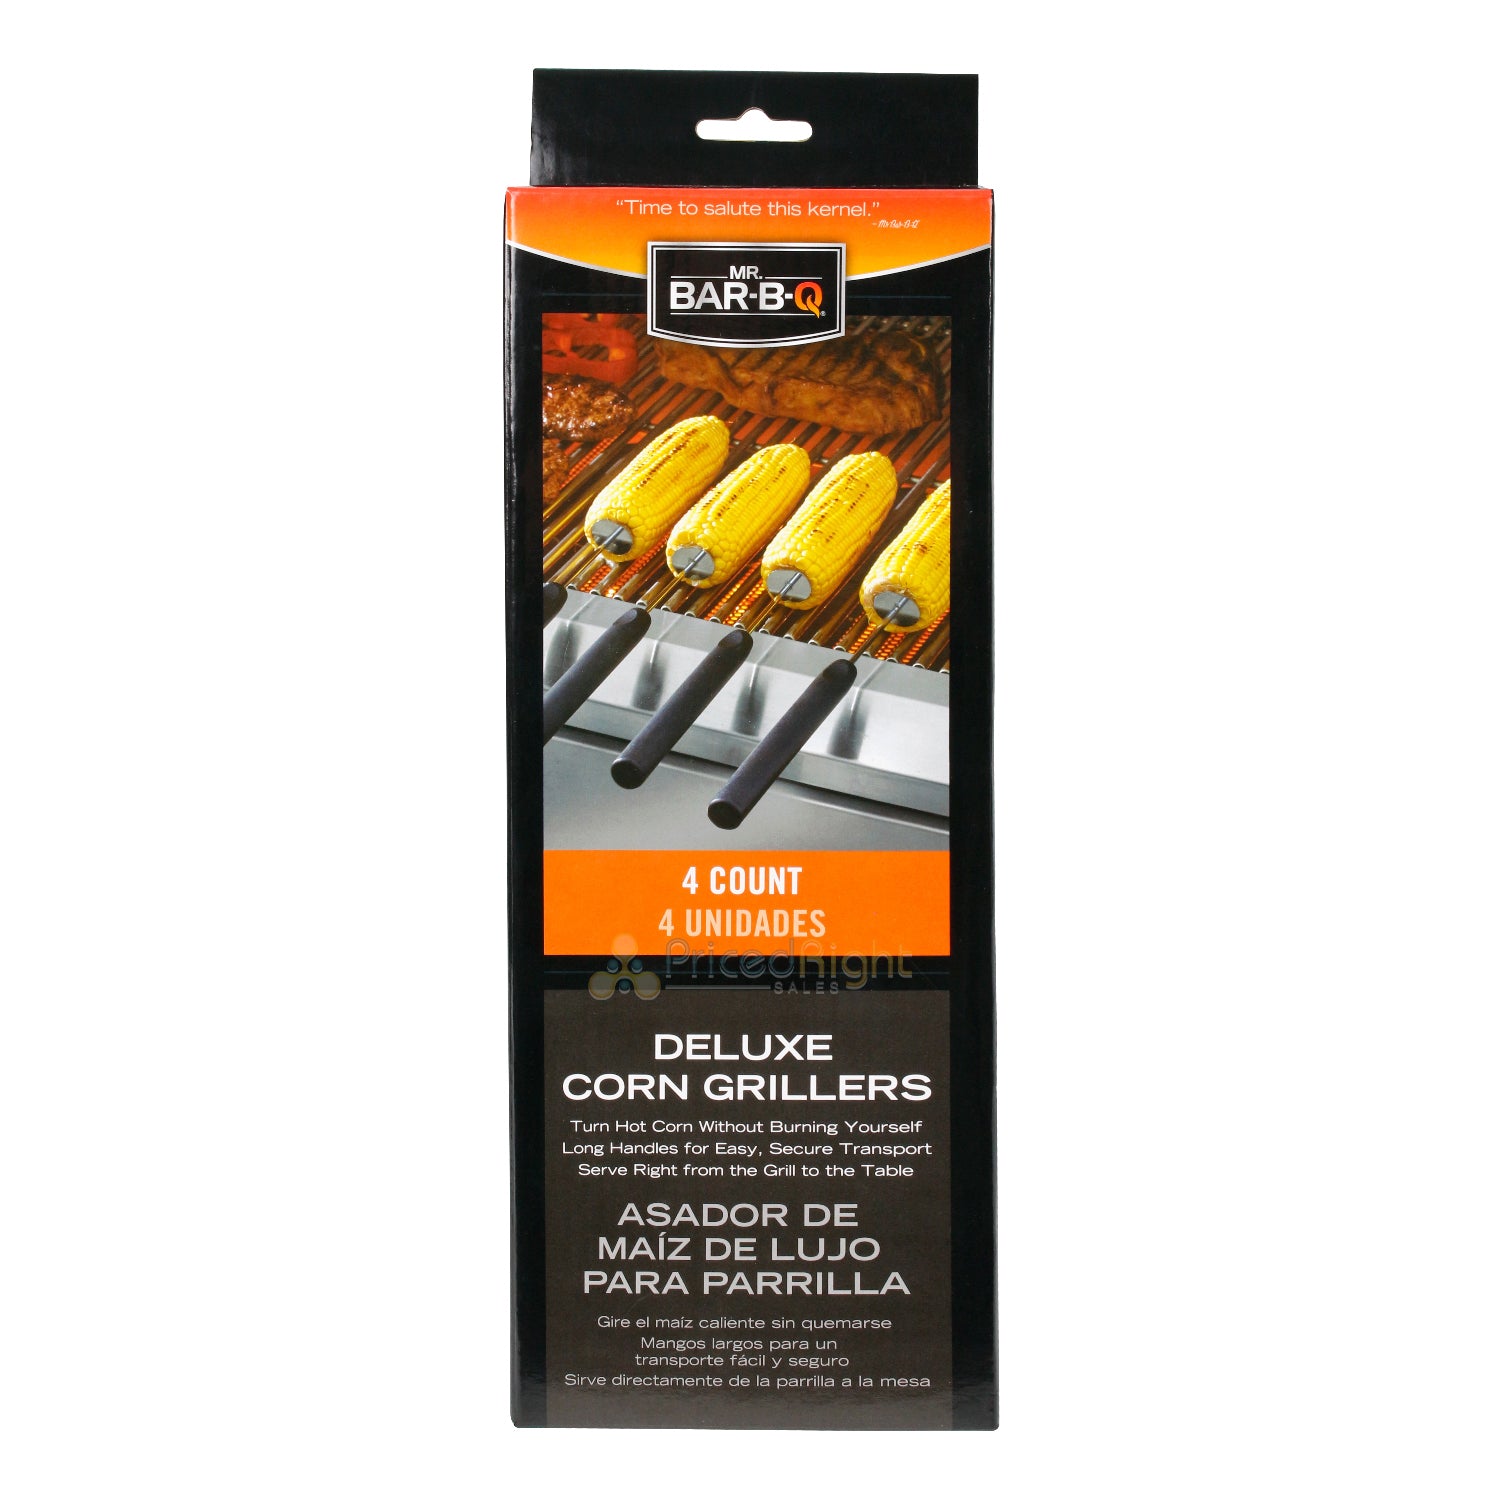 Mr Bar-B-Q Deluxe Corn Grillers With Grip Handles For Corn On The Cob 4 Count